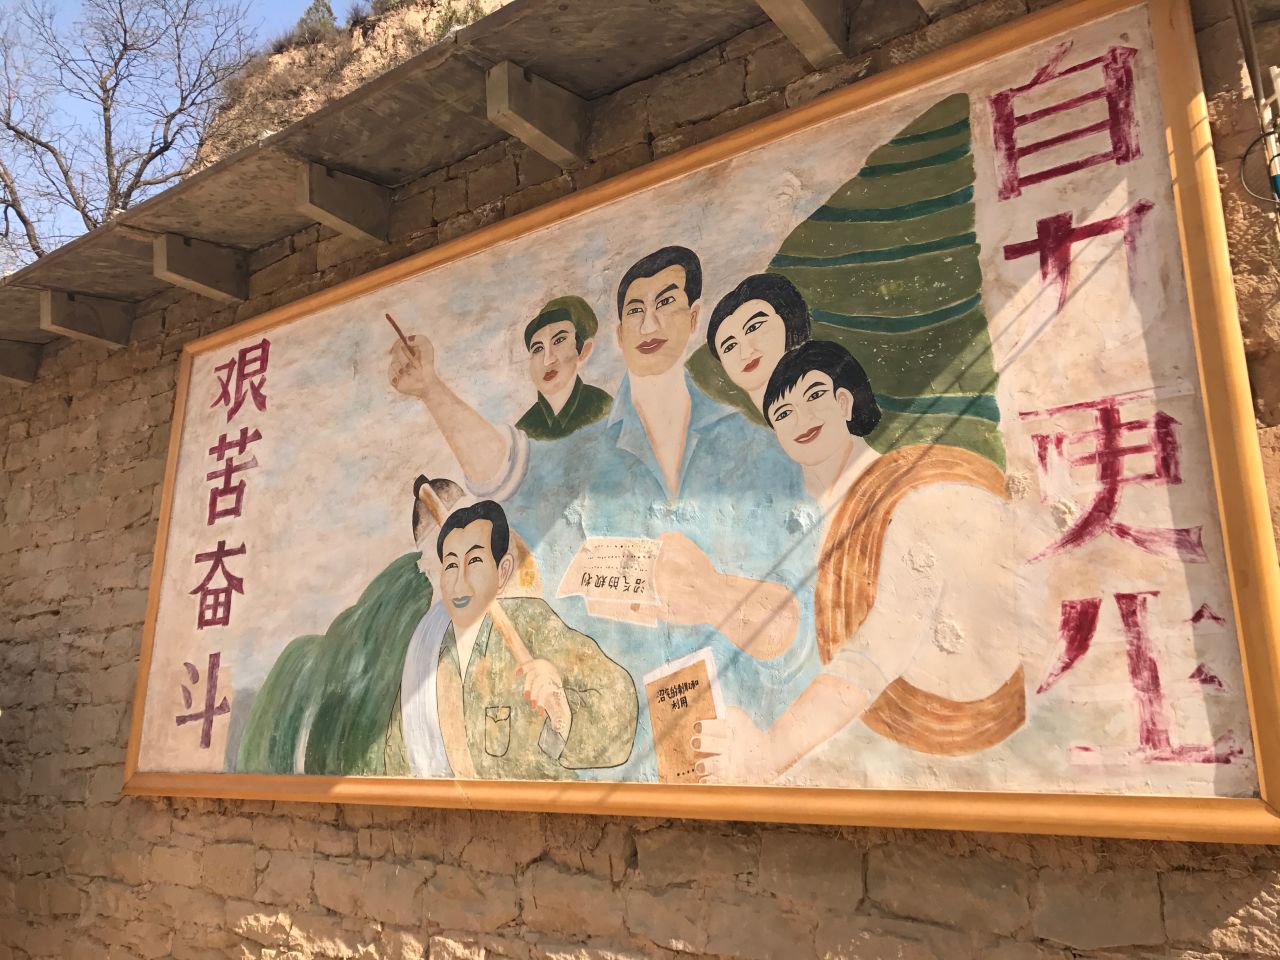 A propaganda poster featuring Xi Jinping as a young Communist Party cadre adorns a wall in Liangjiahe Village, where the Chinese president spent seven years (1969-1975) during the tumultuous Cultural Revolution.